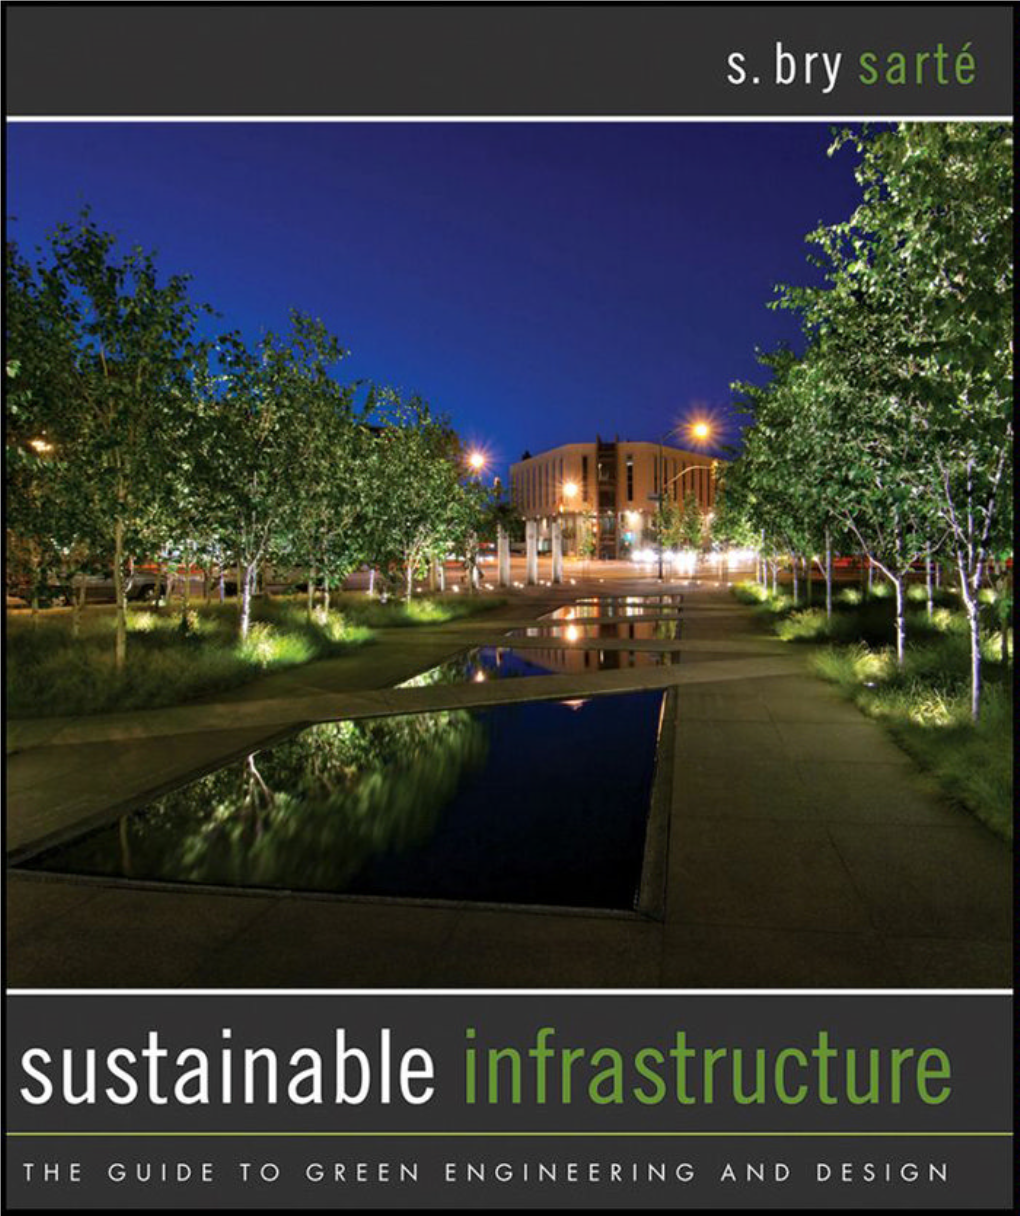 SUSTAINABLE INFRASTRUCTURE 01 453612-Ffirs.Qxd 7/19/10 10:27 AM Page Ii 01 453612-Ffirs.Qxd 7/19/10 10:27 AM Page Iii